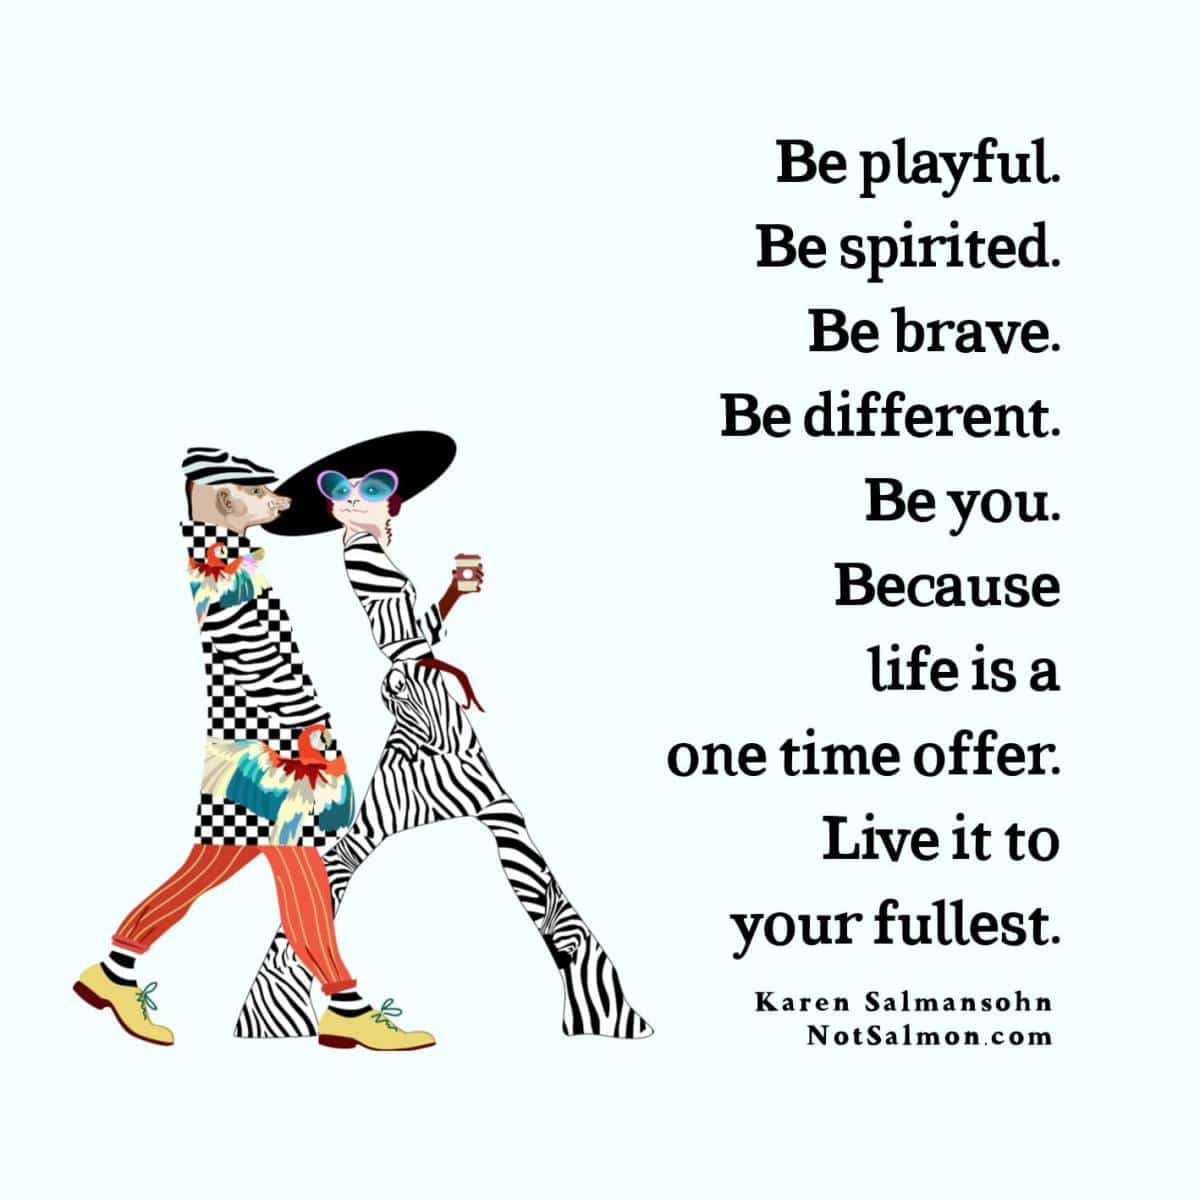 be brave playful spirited different live life to your fullest